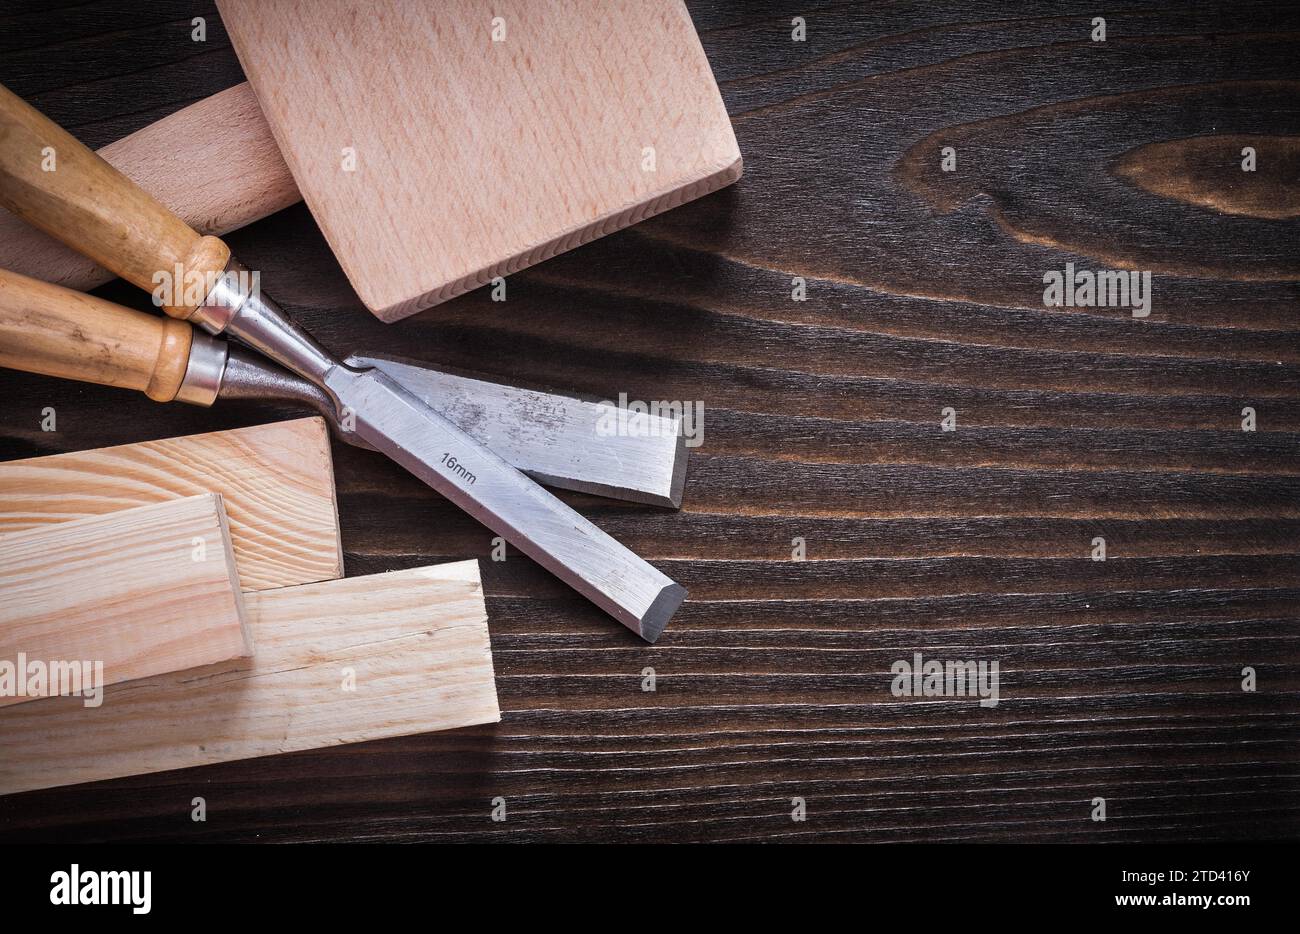 Lump hammer firmer chisels and wooden planks on brown hardwood Construction concept Stock Photo